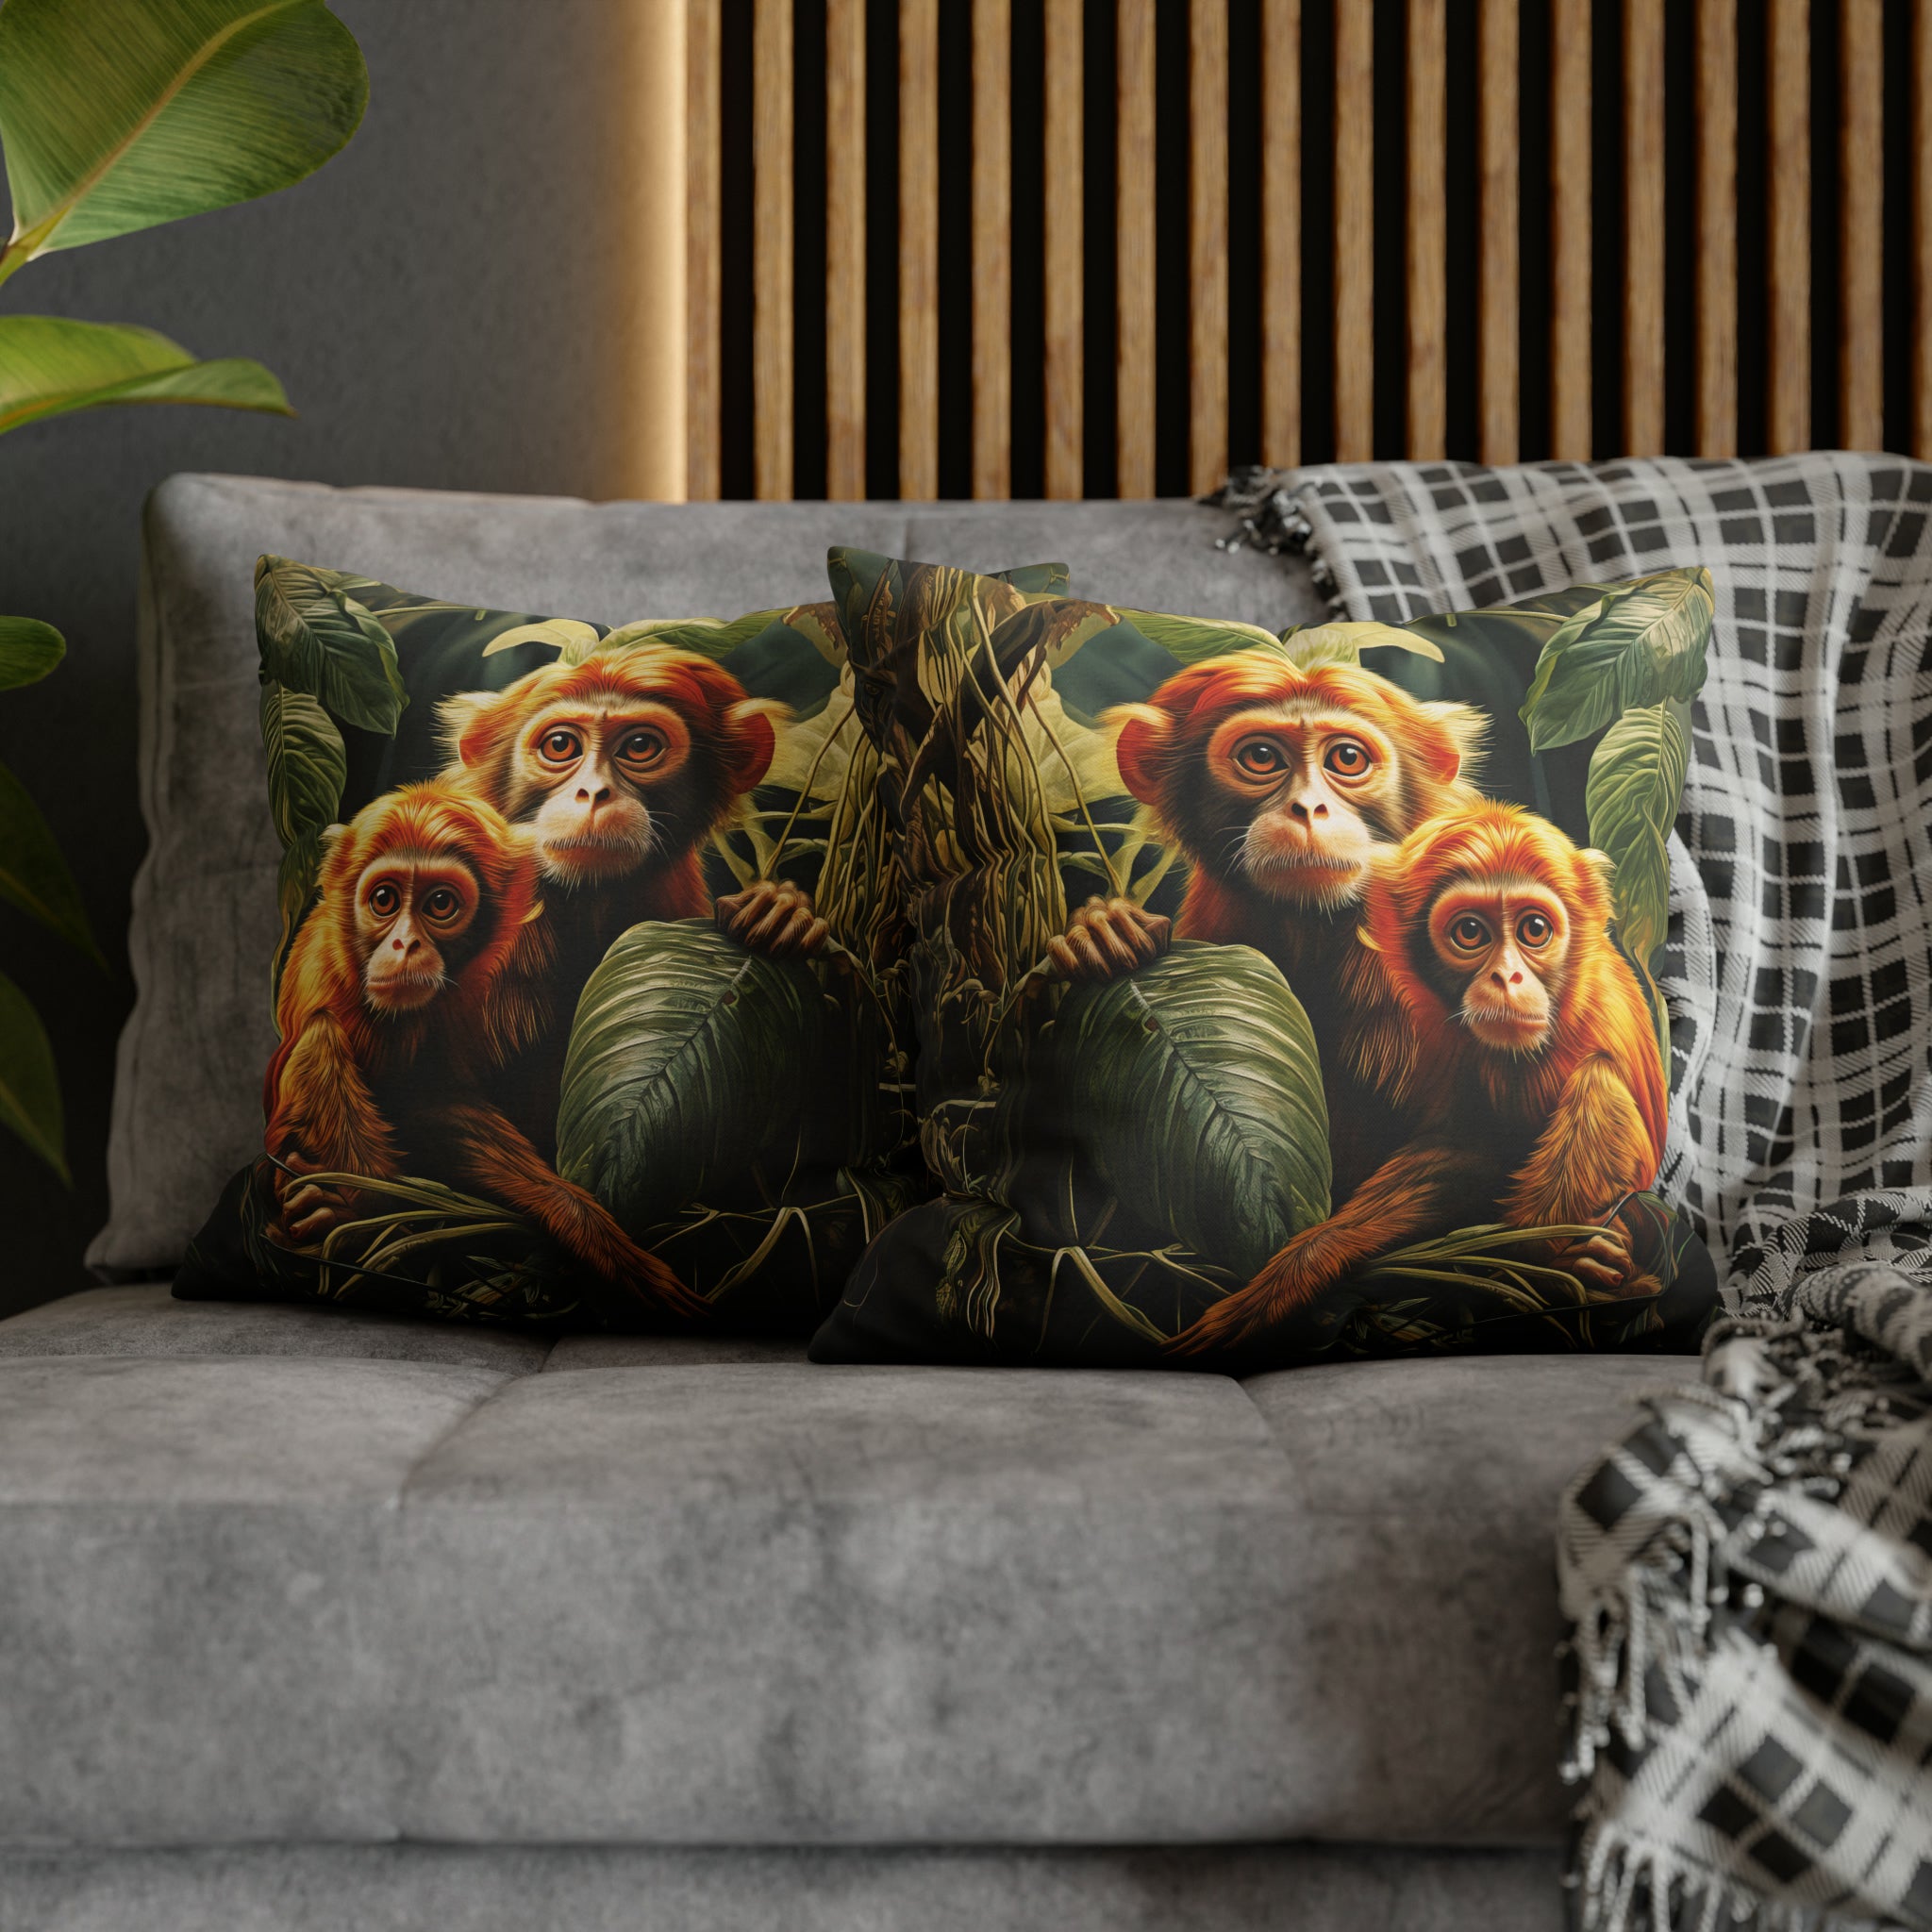 Square Pillow Case 18" x 18", CASE ONLY, no pillow form, original Art ,Colorful, a Mother Monkey and Her Infant on a Branch in the Jungle